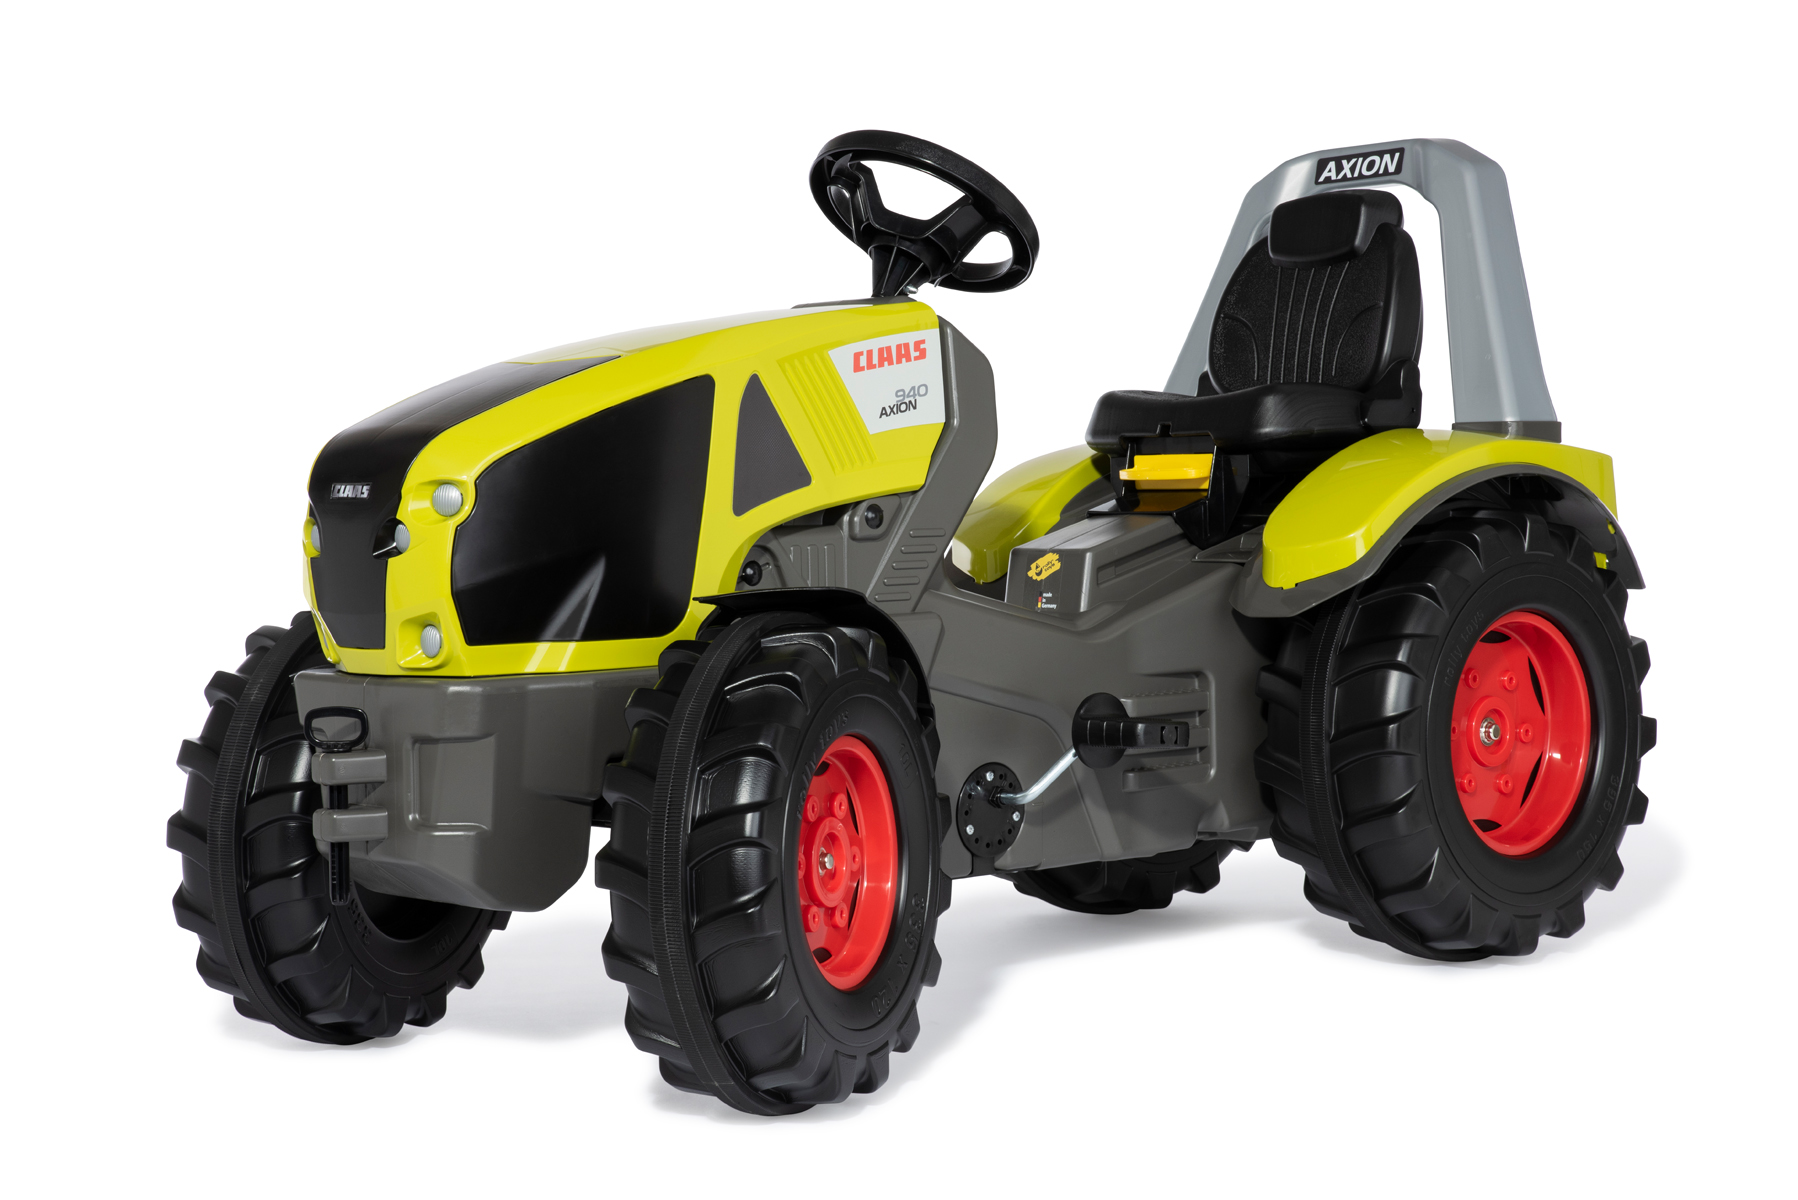 rollyX-Trac Premium CLAAS ✓ 640089 ✓ rolly toys® ✓ Original vom Hersteller  ✓ Made in Germany